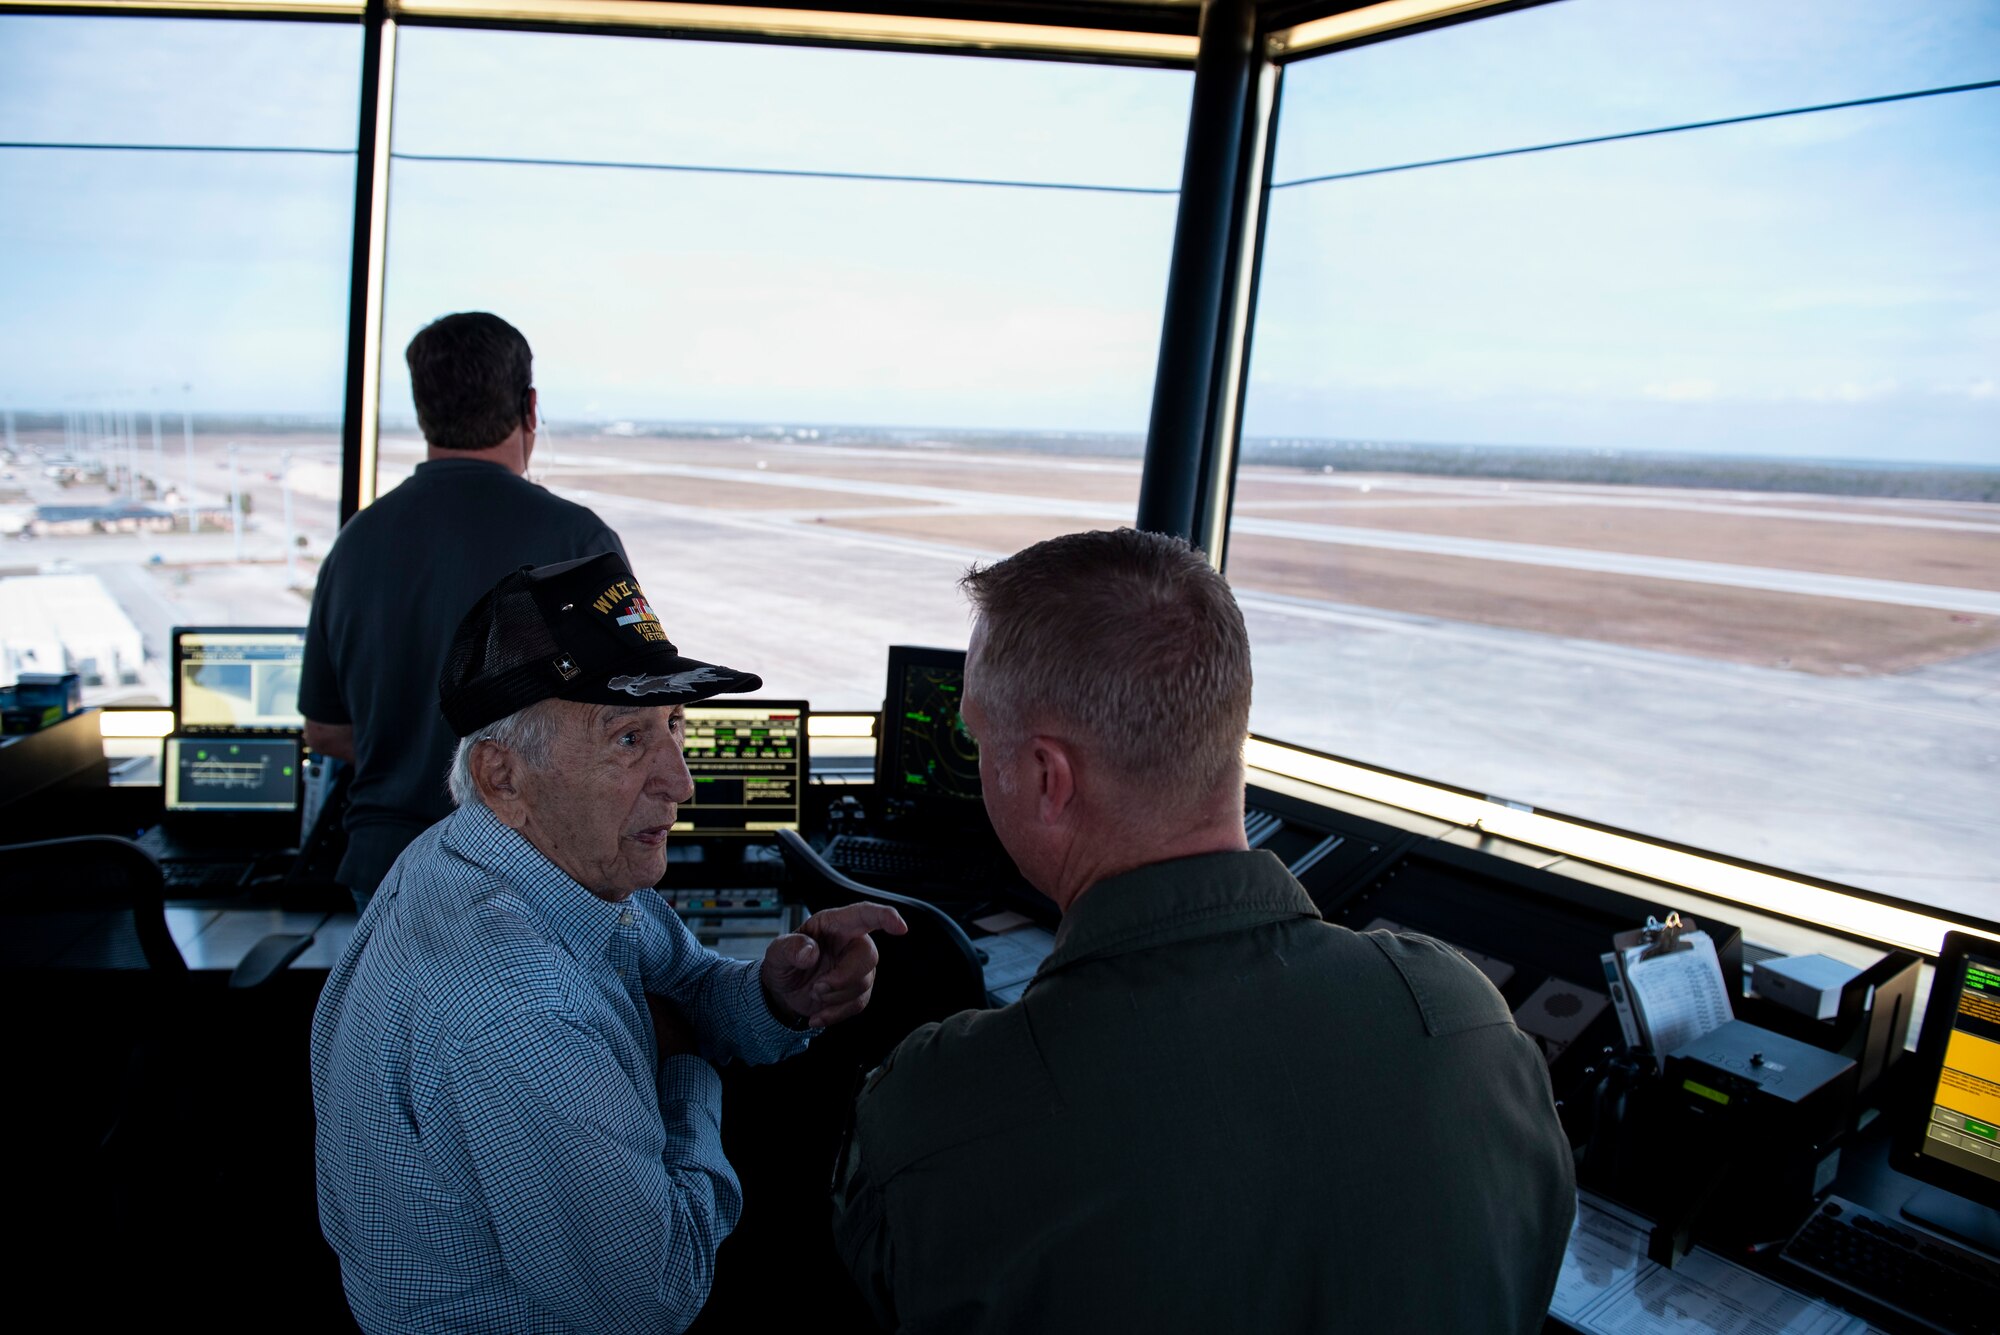 Retired U.S. Air Force Lt. Col. Daniel Daube, left, speaks to U.S. Air Force Col. Brian Laidlaw, 325th Fighter Wing commander, in the air traffic control tower at Tyndall Air Force Base, Florida, Nov. 27, 2019. Daube was a veteran of World War II, Korean, and Vietnam war, flying multiple air frames and combat missions. Daube visited Tyndall's air traffic control tower and saw planes launch off the runway. (U.S. Air Force photo by Staff Sgt. Magen M. Reeves)